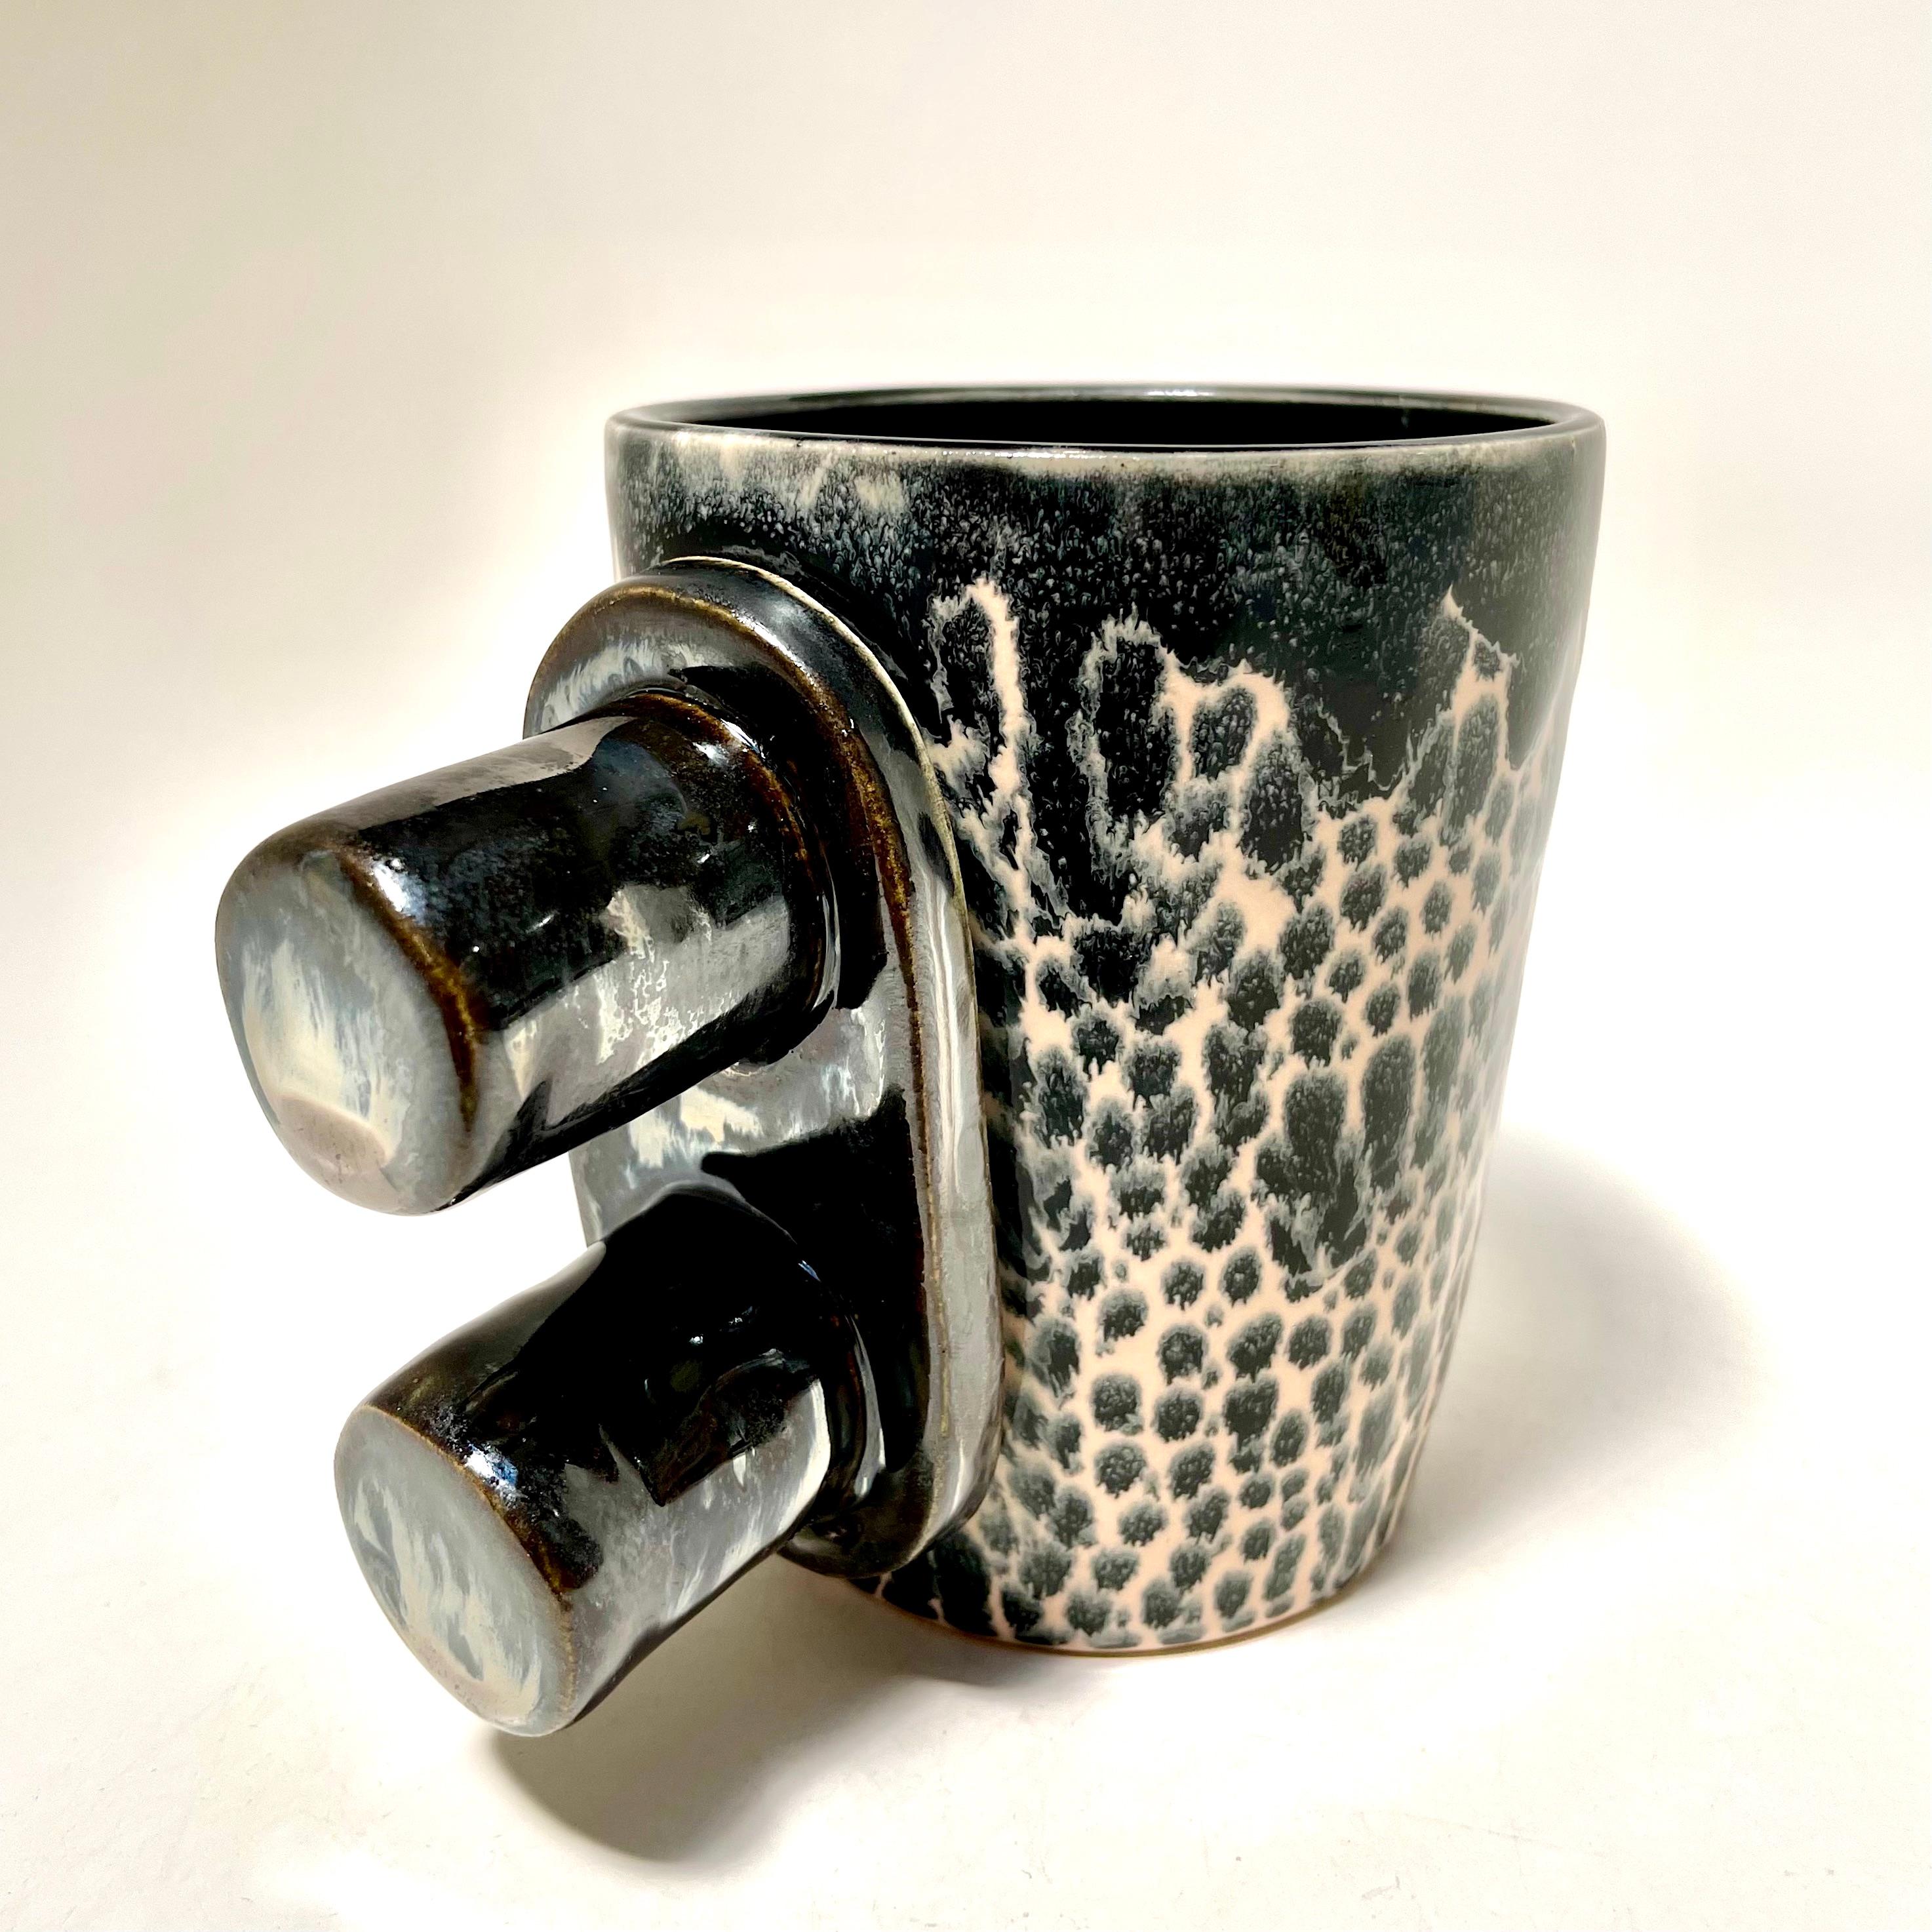 The Magnum Double Barrel, shown here in galaxy and broken silver, the food safe vessel for your favorite beverage of choice, entertaining, or as a decorative object or objet d'art. Versatile, sustainable and one of kind, made of recycled stoneware